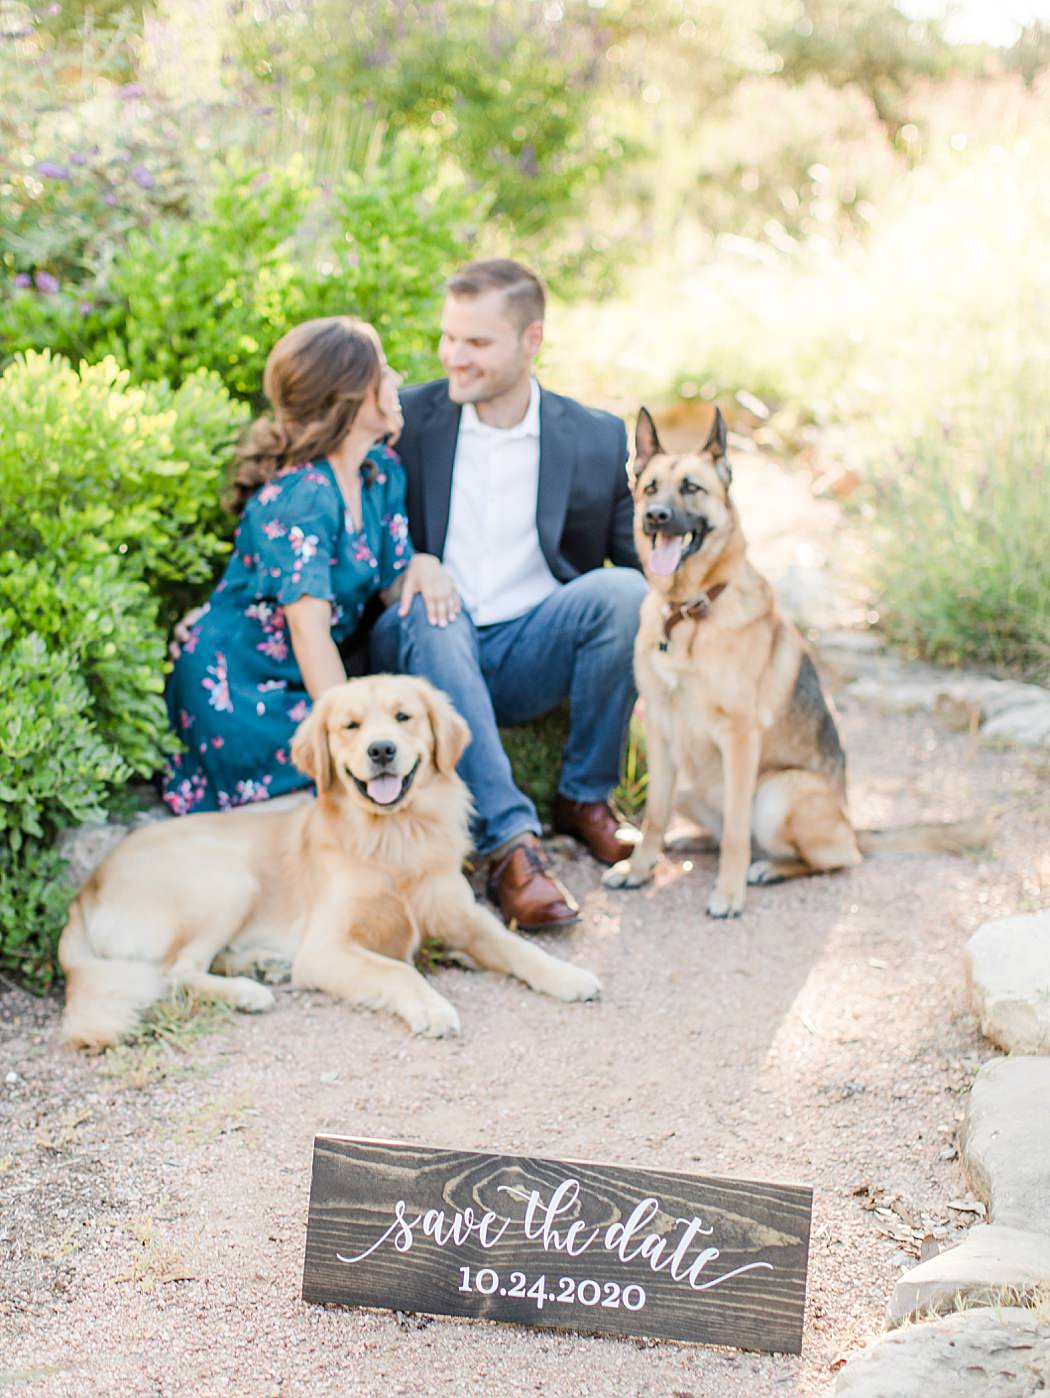 Contigo Ranch Engagement Session in Fredericksburg texas by Allison Jeffers Photography 0013